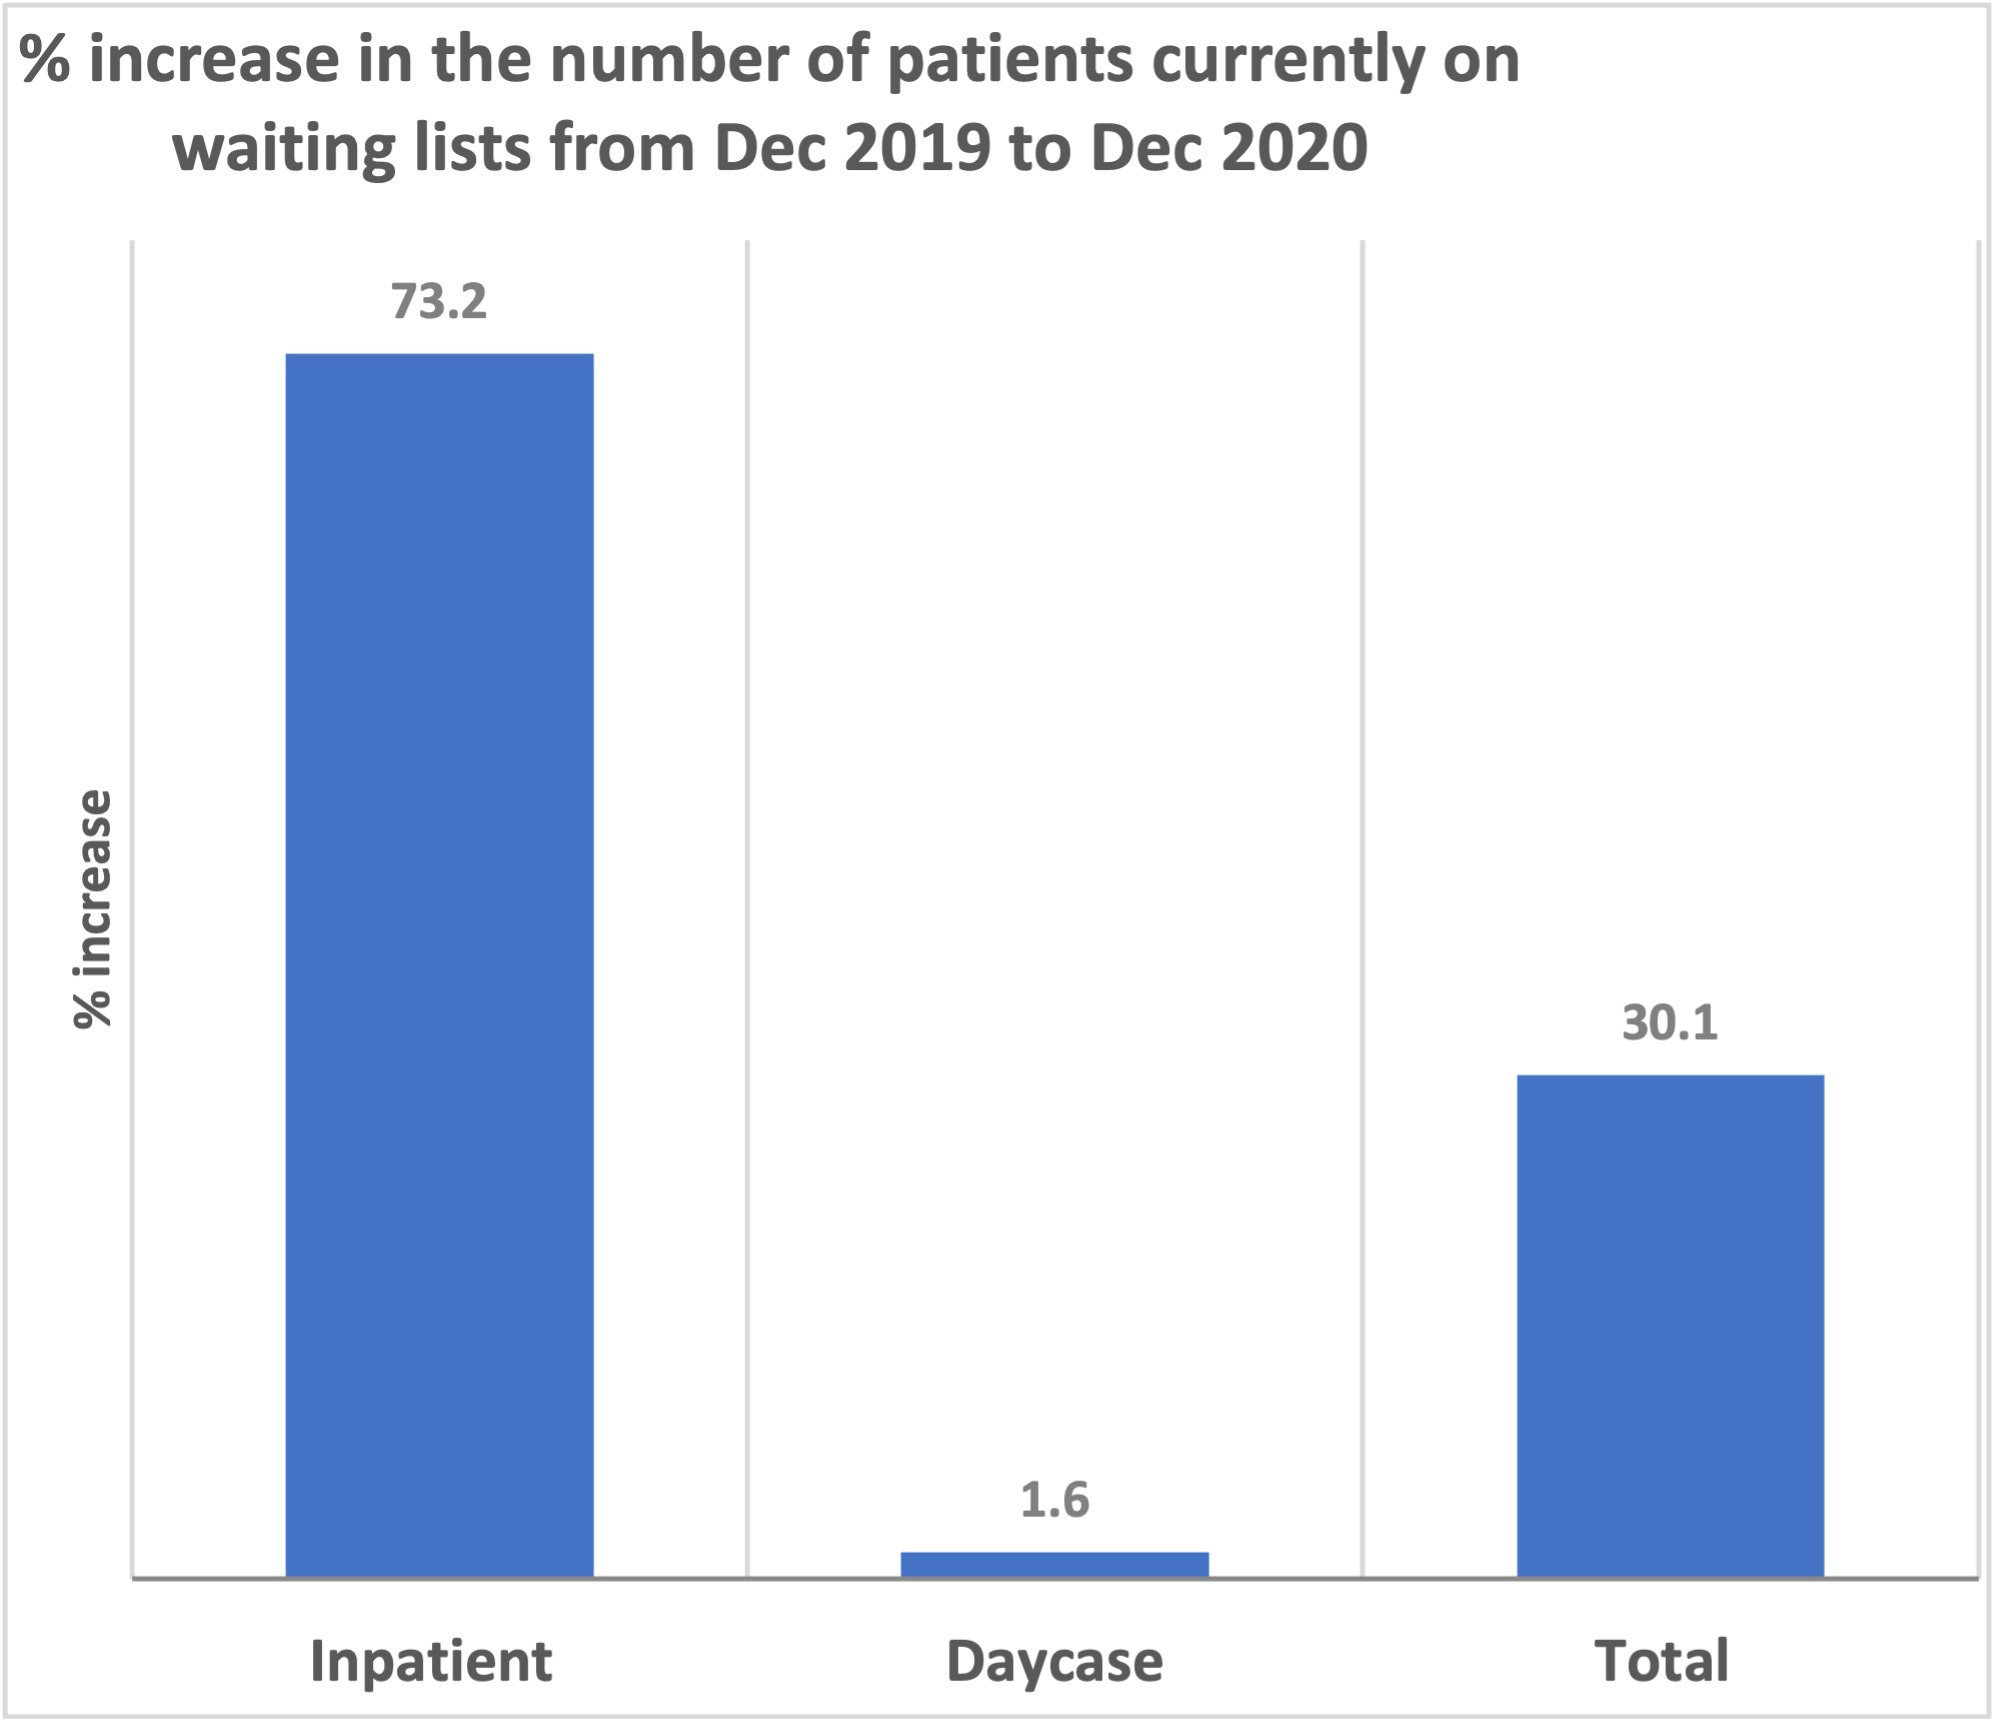 Fig. 3 
            Differences seen between waiting lists. There was a 73.2% increase in inpatient waiting lists, compared to a 1.6% increase in day-case waiting lists.
          